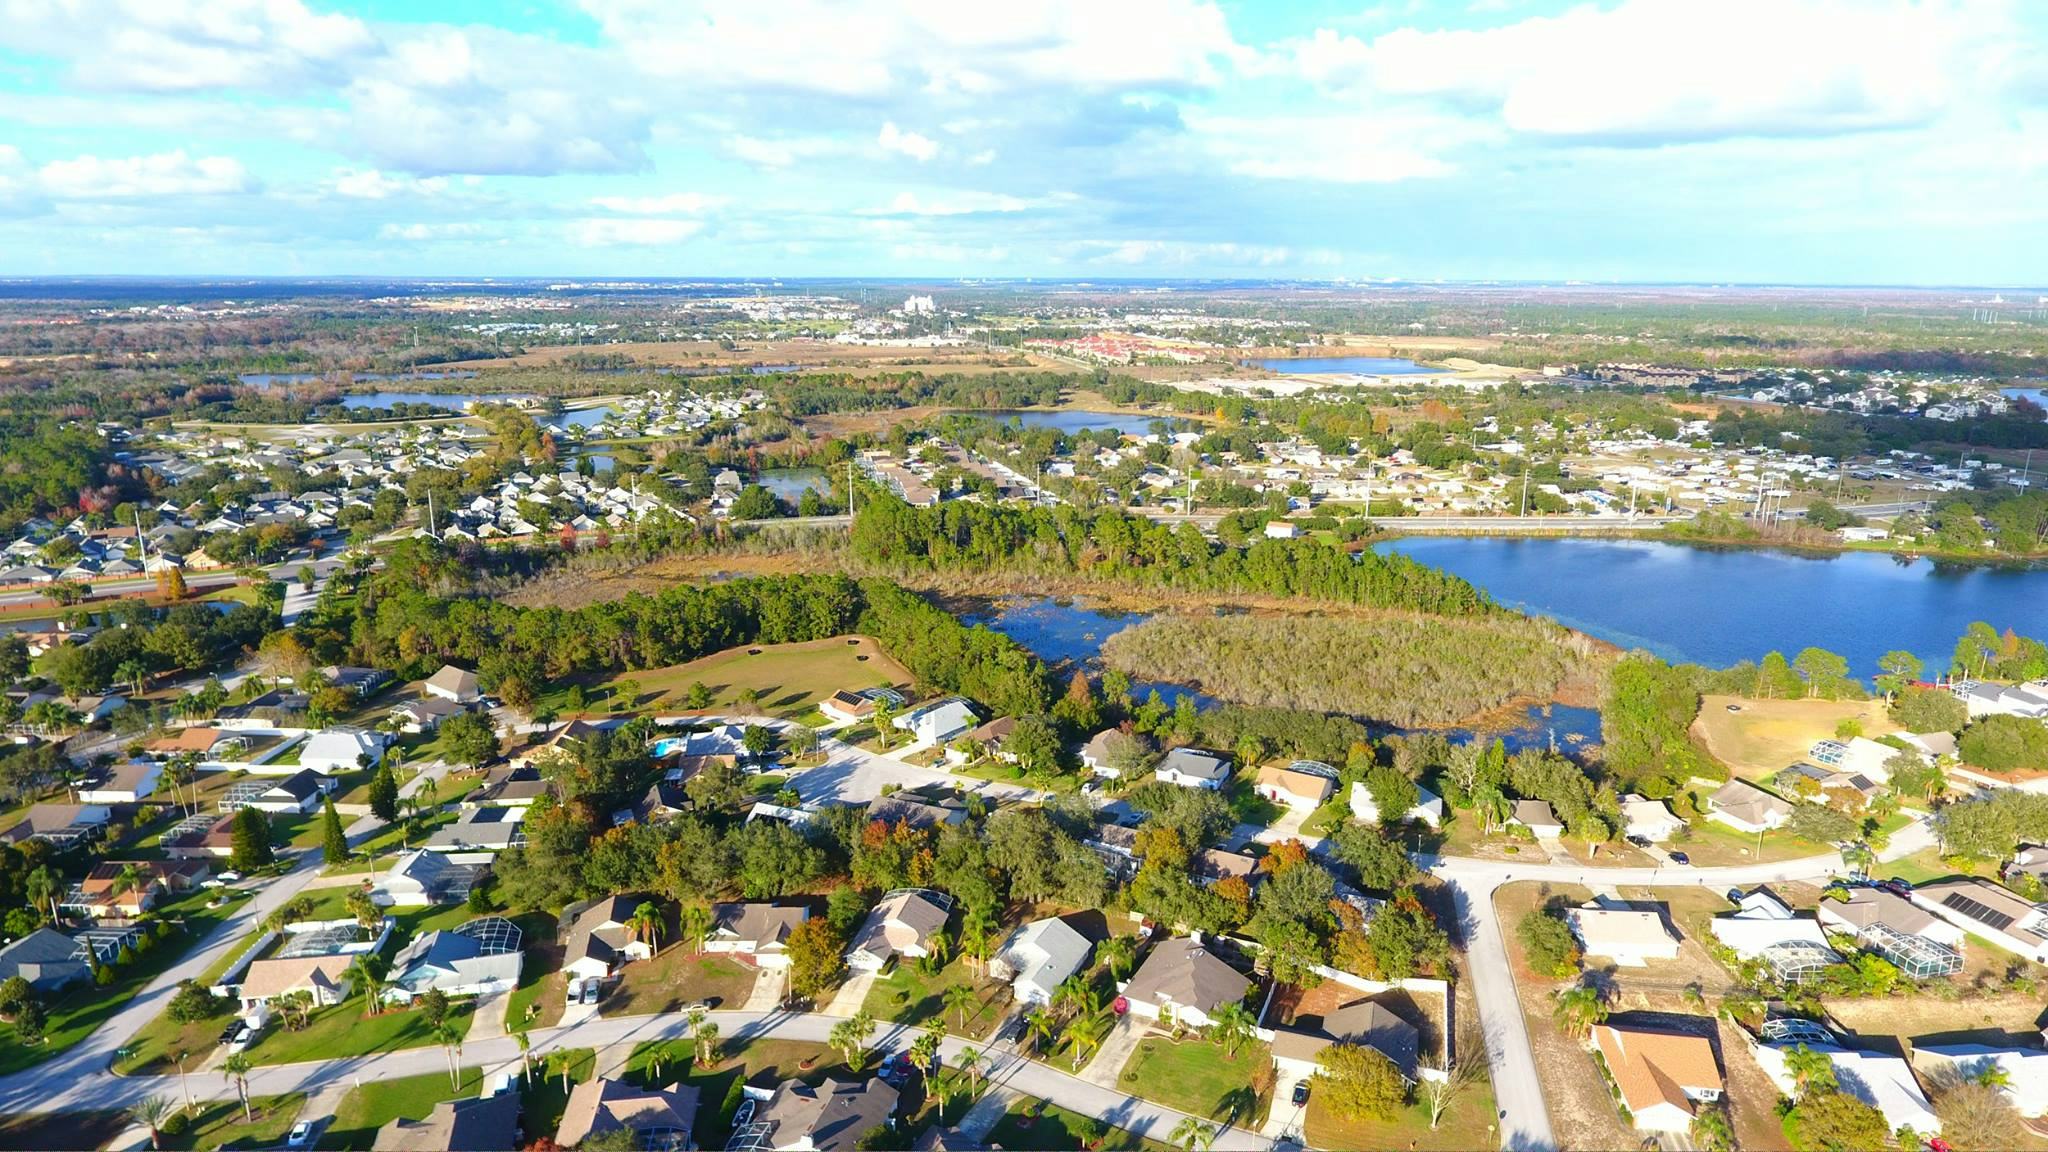 Aerial view of the city of Davenport FL